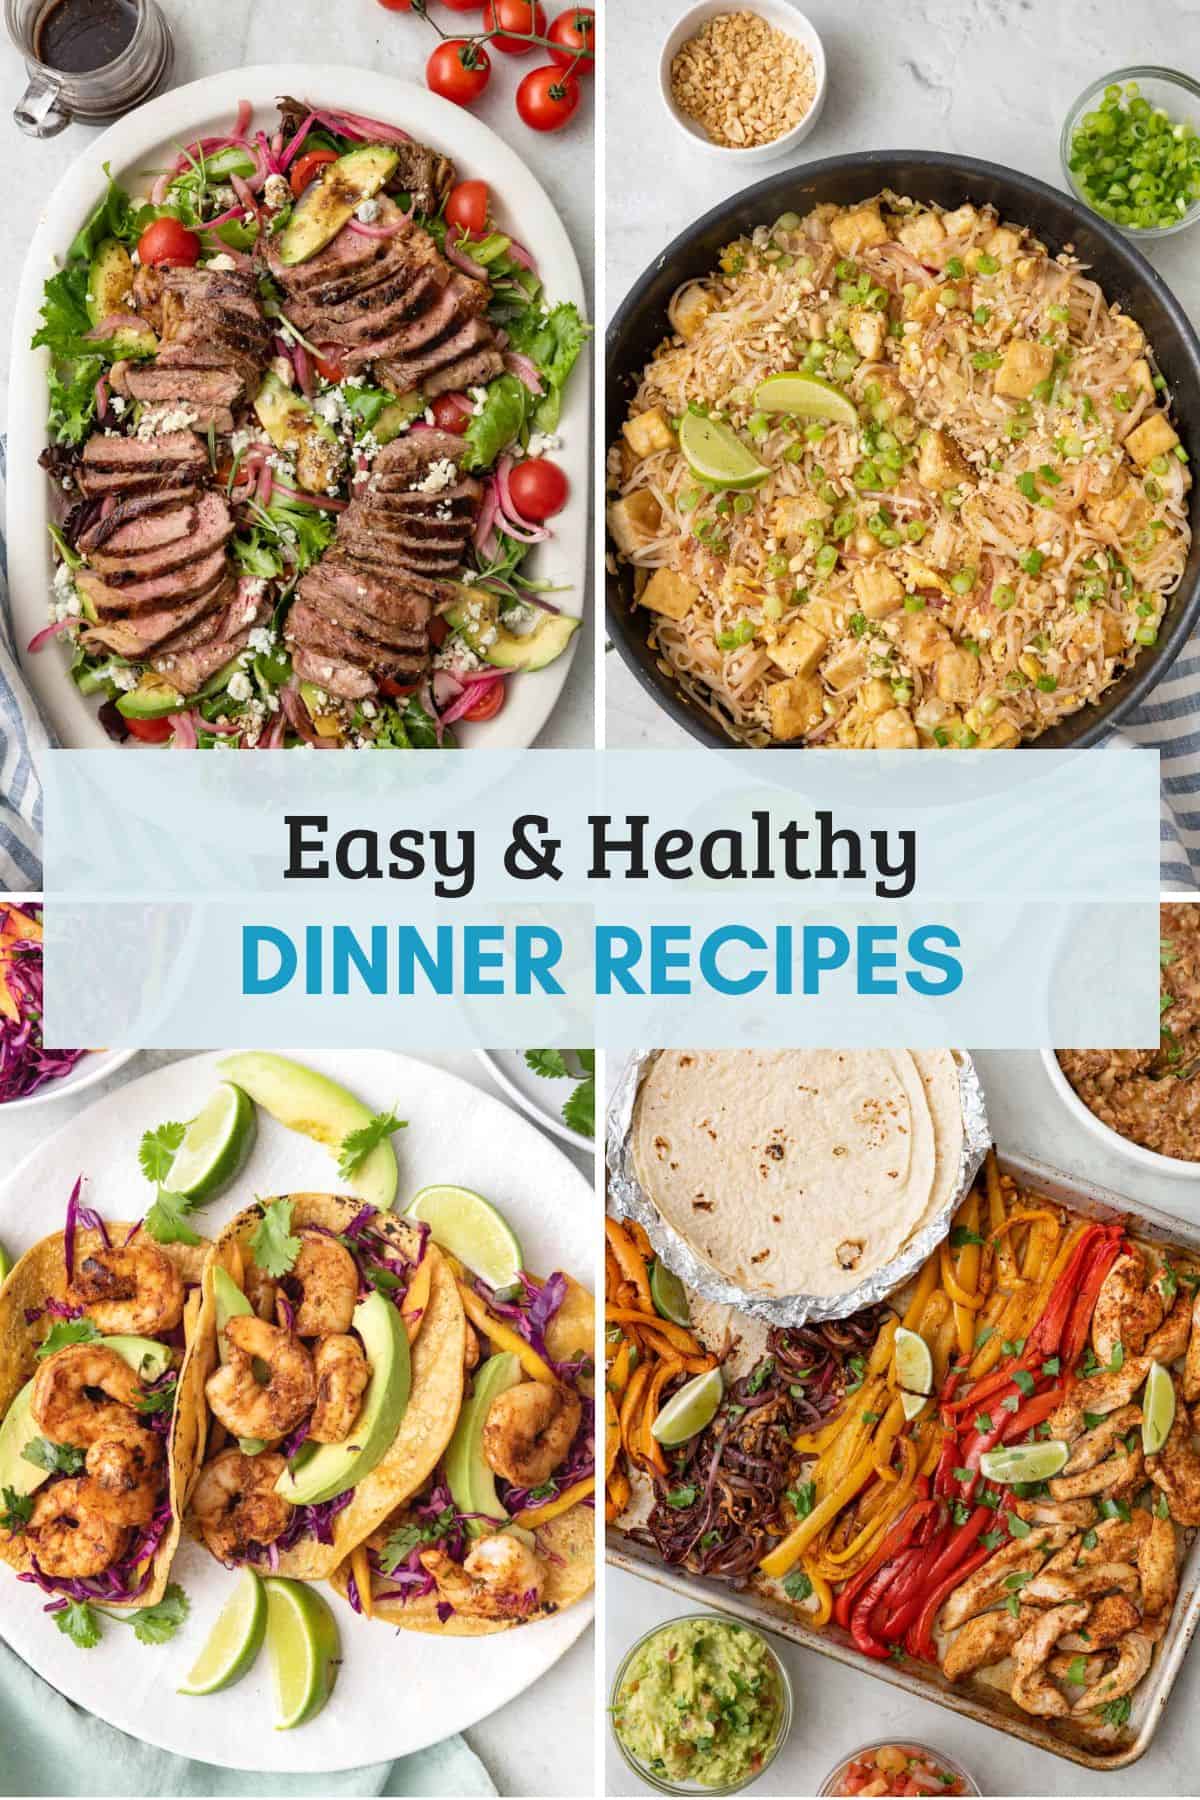 Easy and healthy dinner recipes.